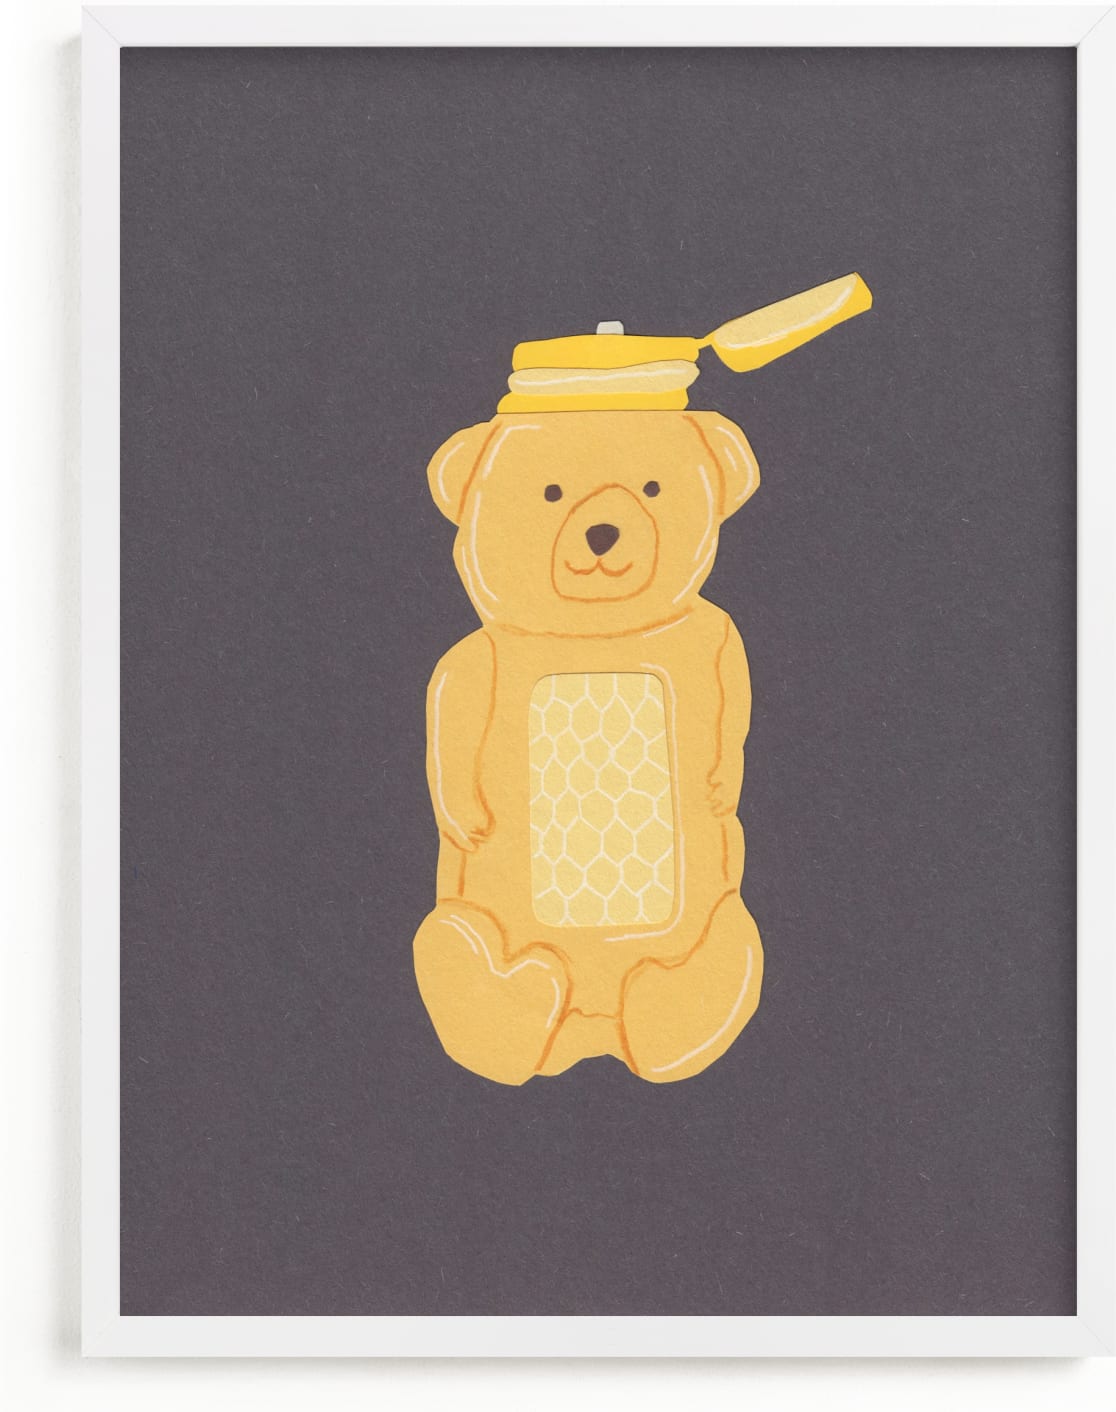 This is a yellow kids wall art by Elliot Stokes called Honey Bear.